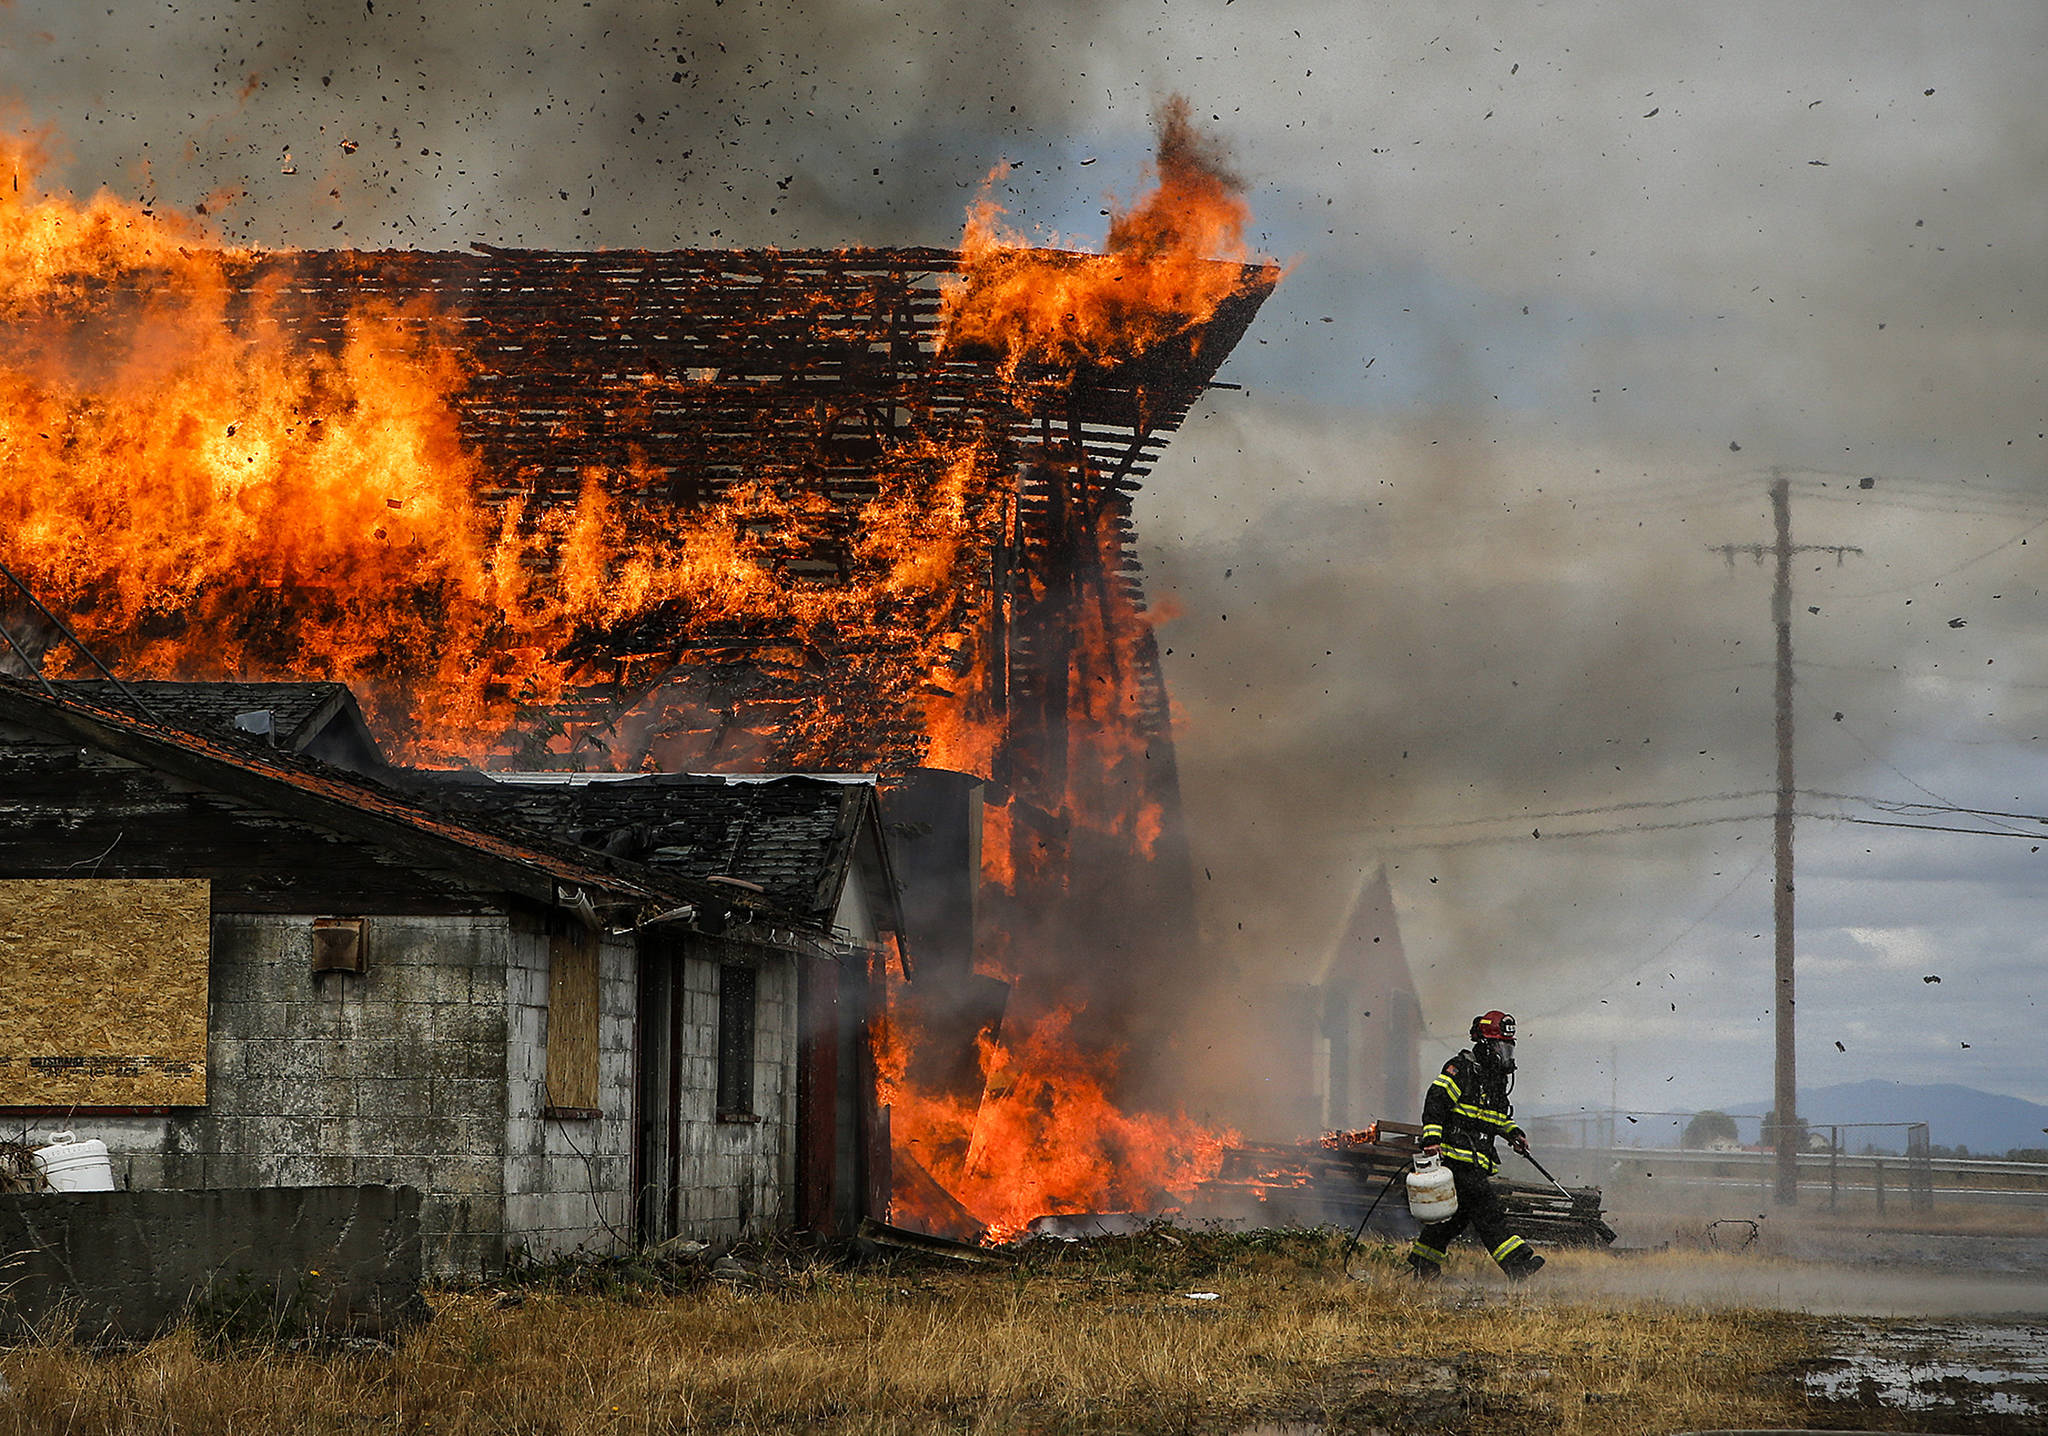 A barn burns on the Ovenell property in Stanwood on Friday, Aug. 18. The barn was deemed too unstable to be included in the city’s plans for a new park on the land so local fire departments burned it down as a training exercise. (Ian Terry / The Herald)